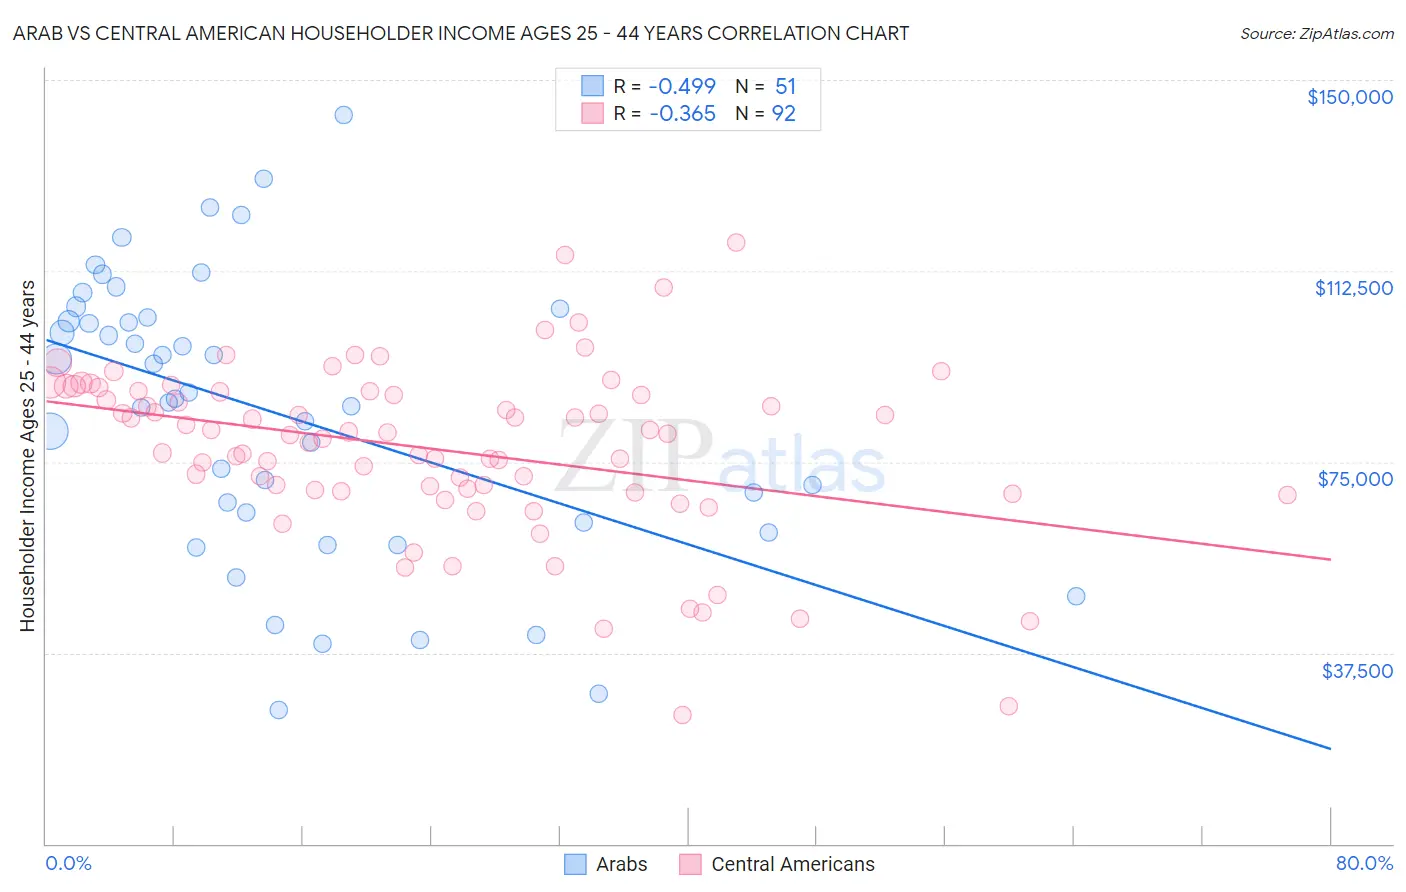 Arab vs Central American Householder Income Ages 25 - 44 years